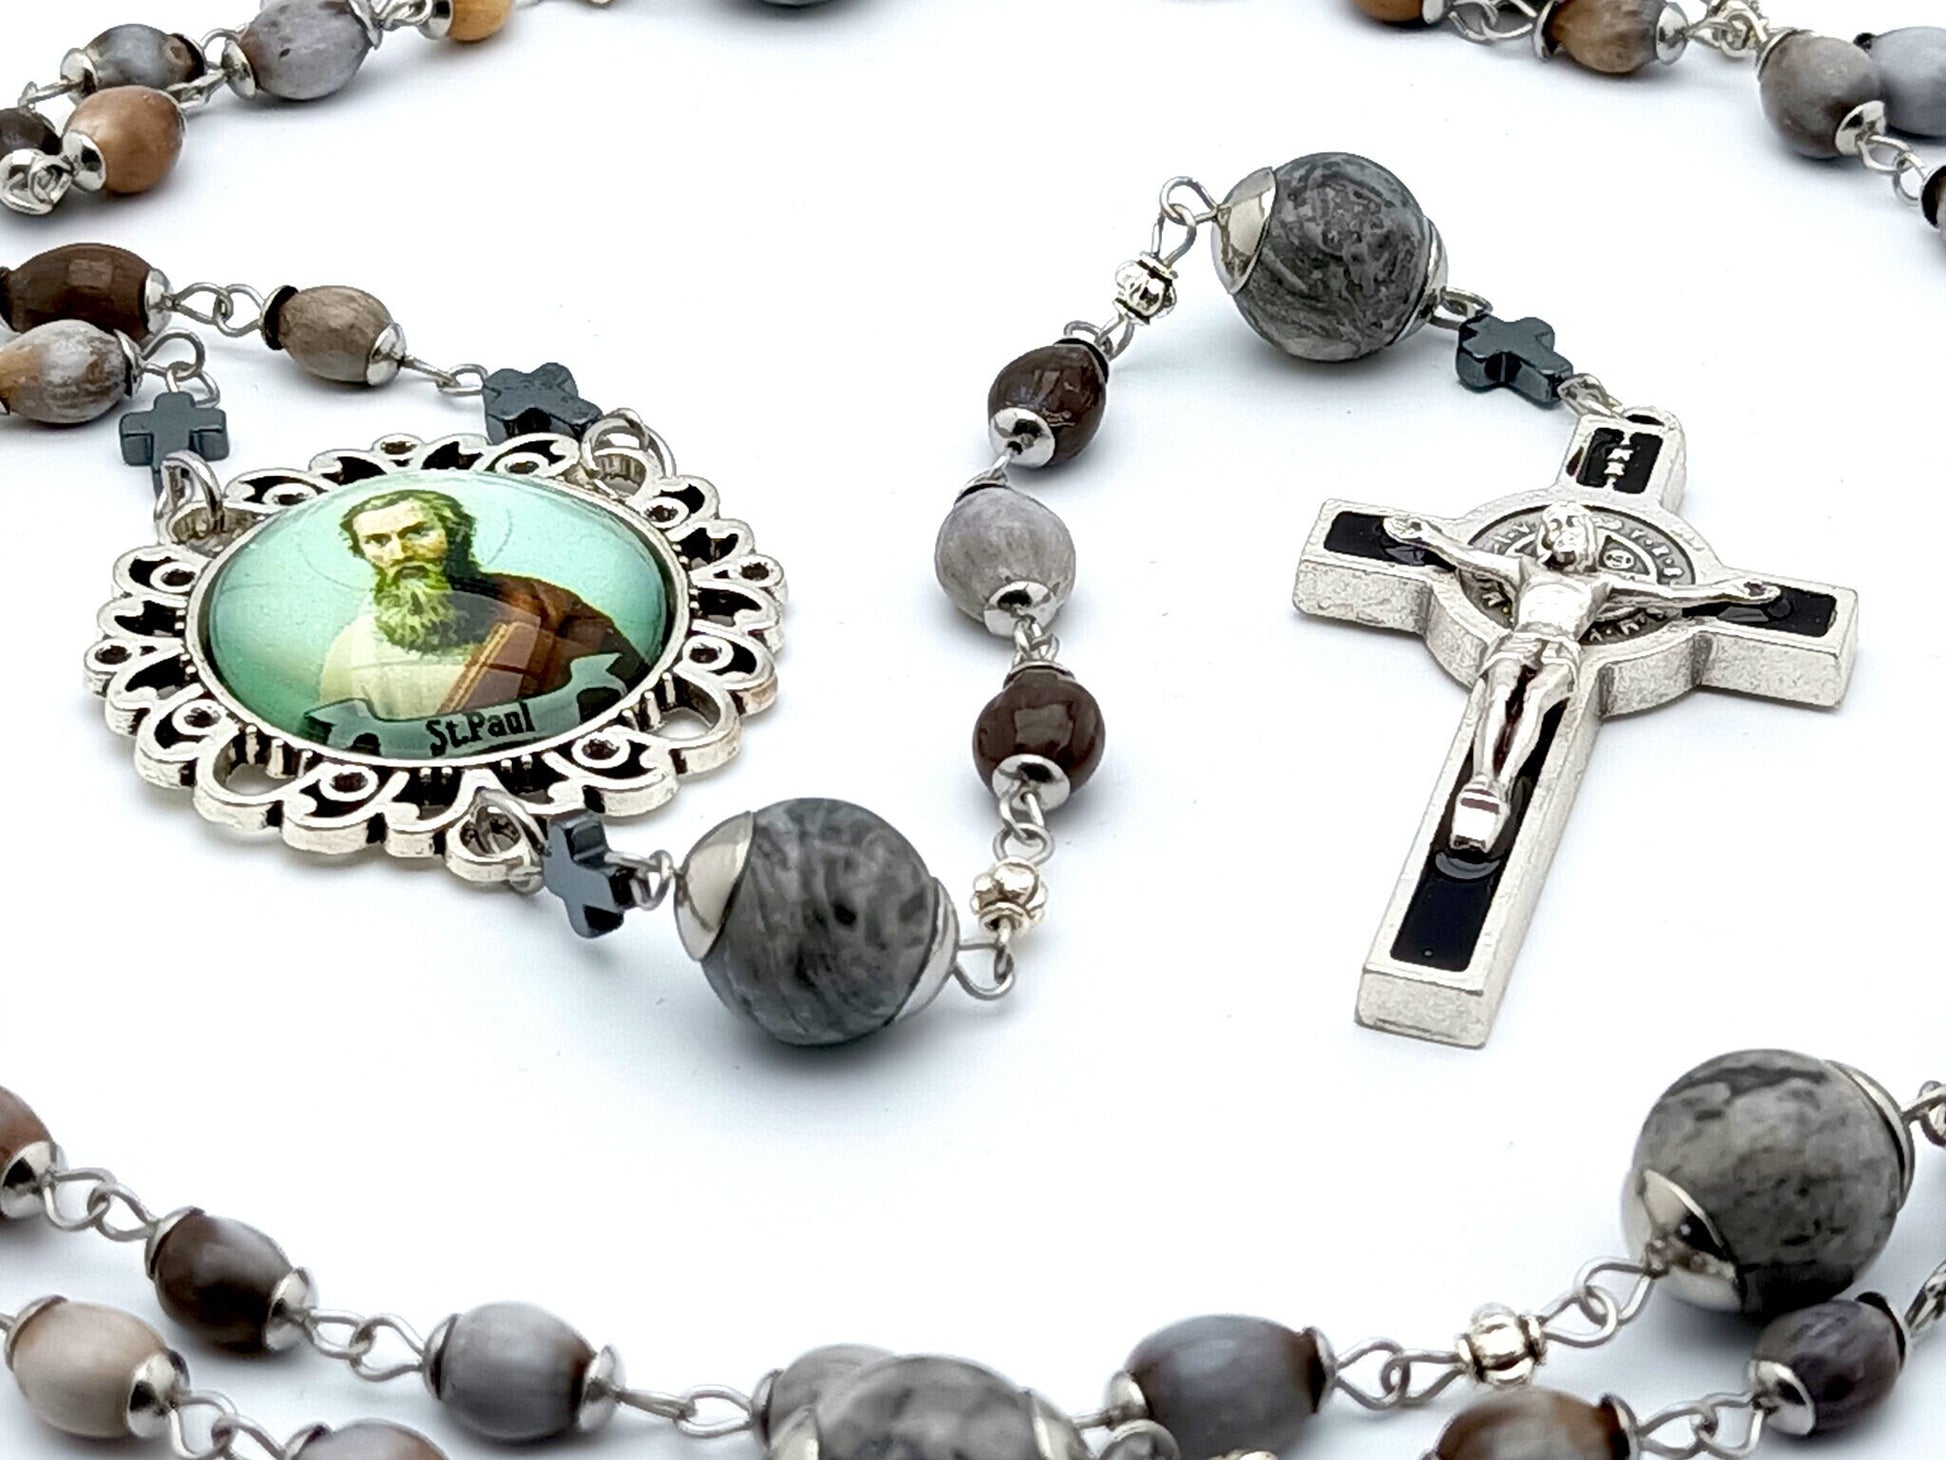 Saint Paul unique rosary beads with Jobs tears and gemstone beads, black and silver enamal Saint Benedict crucifix and large picture centre medal.